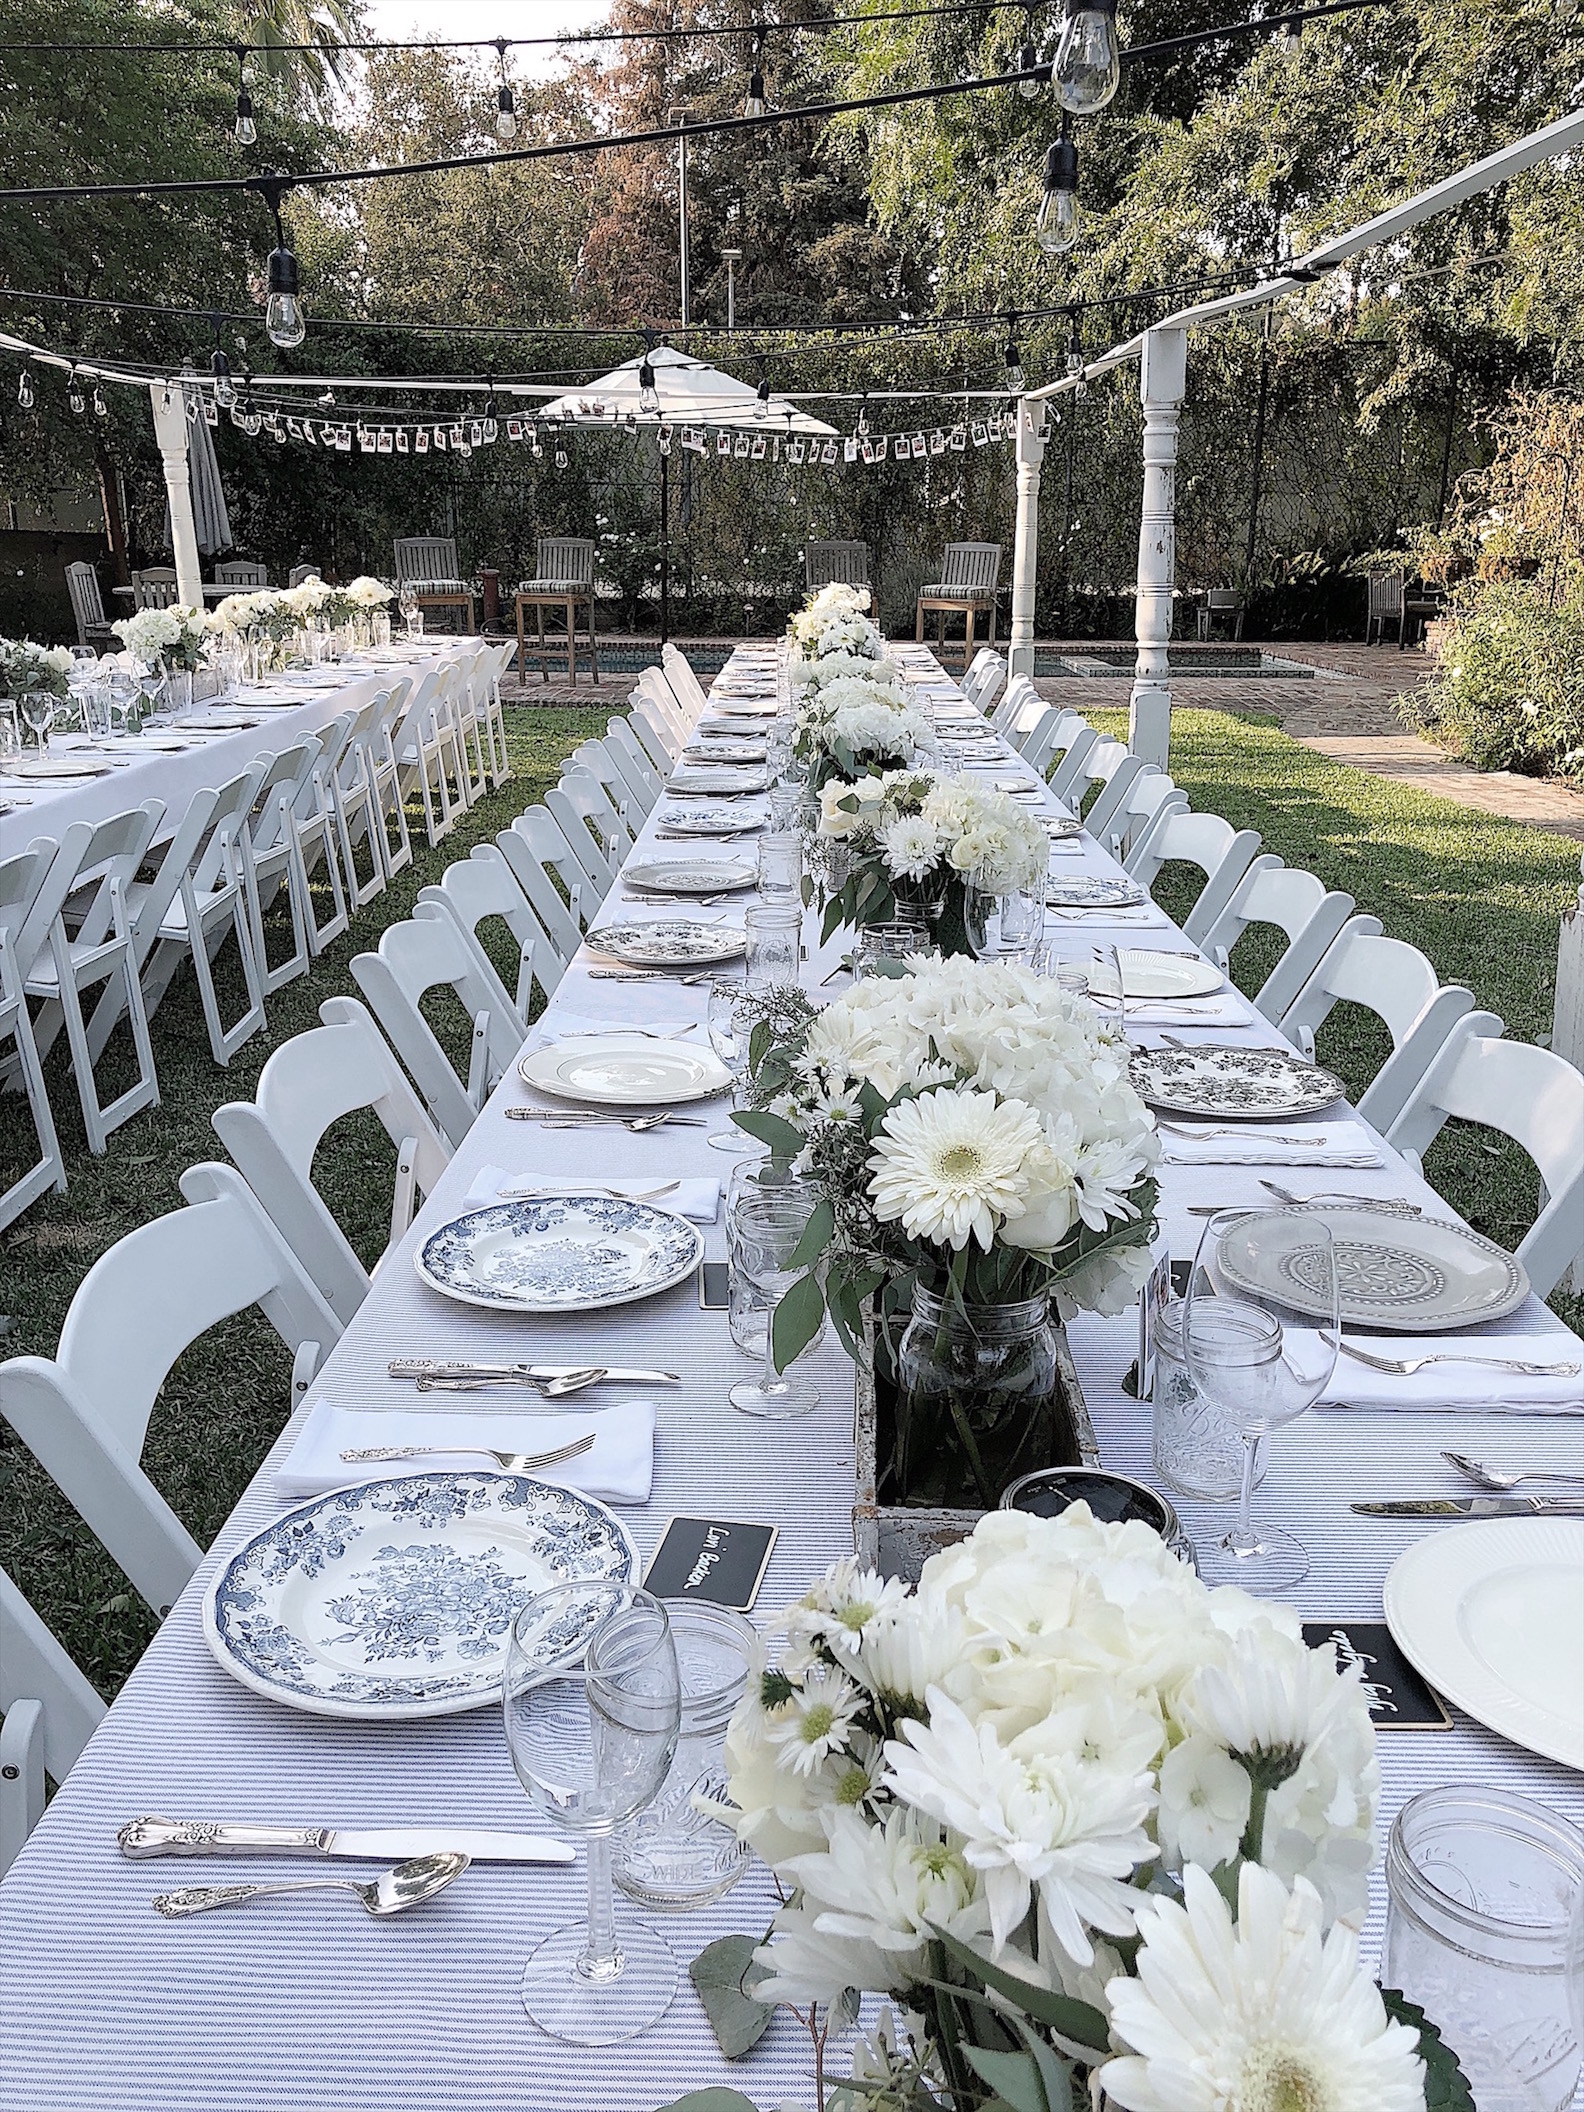 Rows of tables all decorated in summer white.